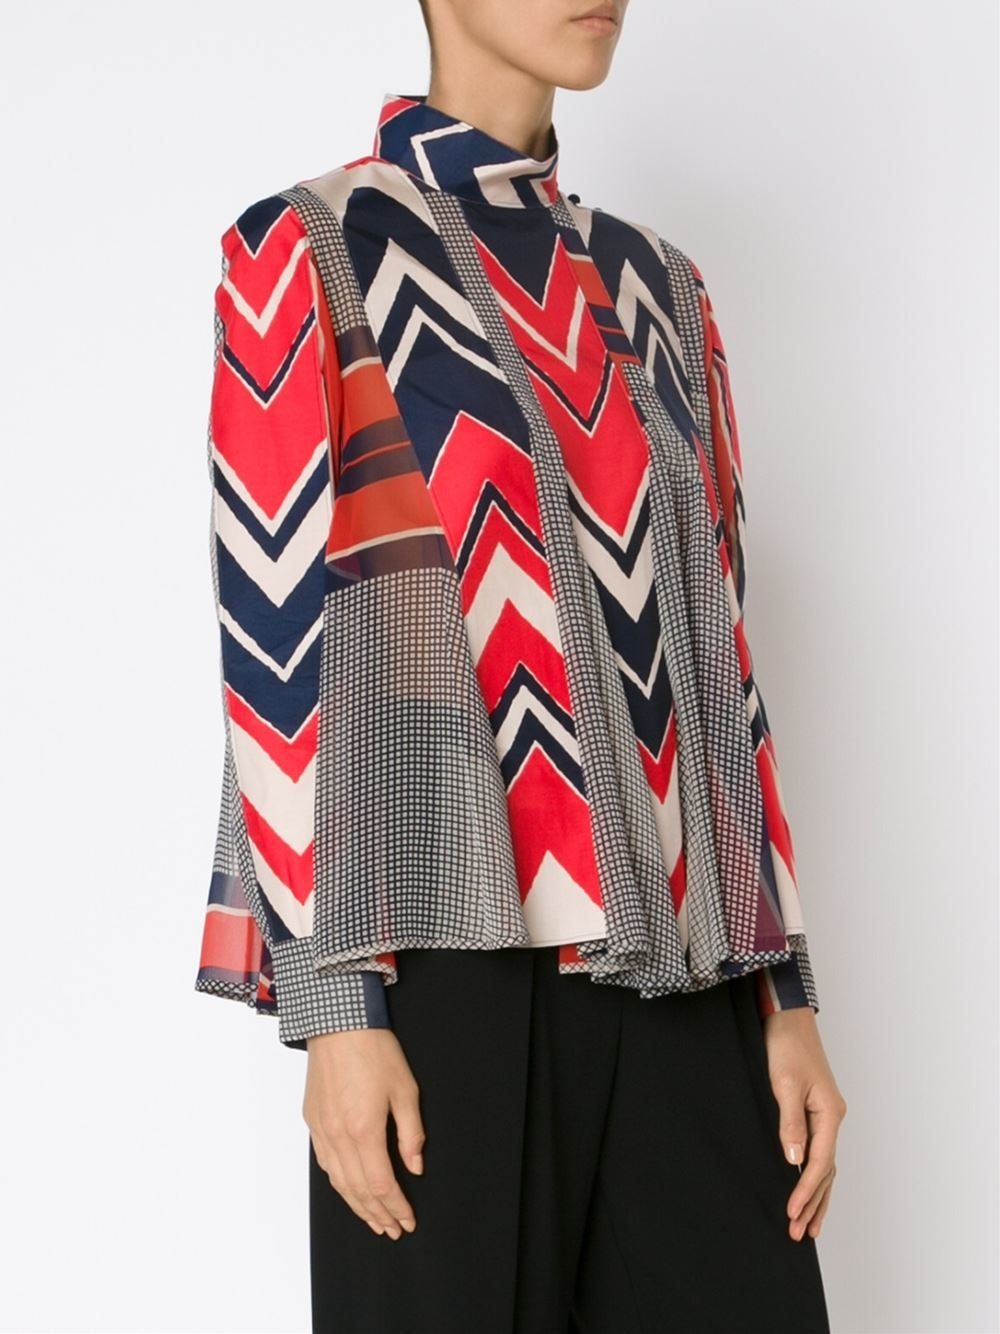 Lyst - Sacai Printed Panel Blouse in Blue